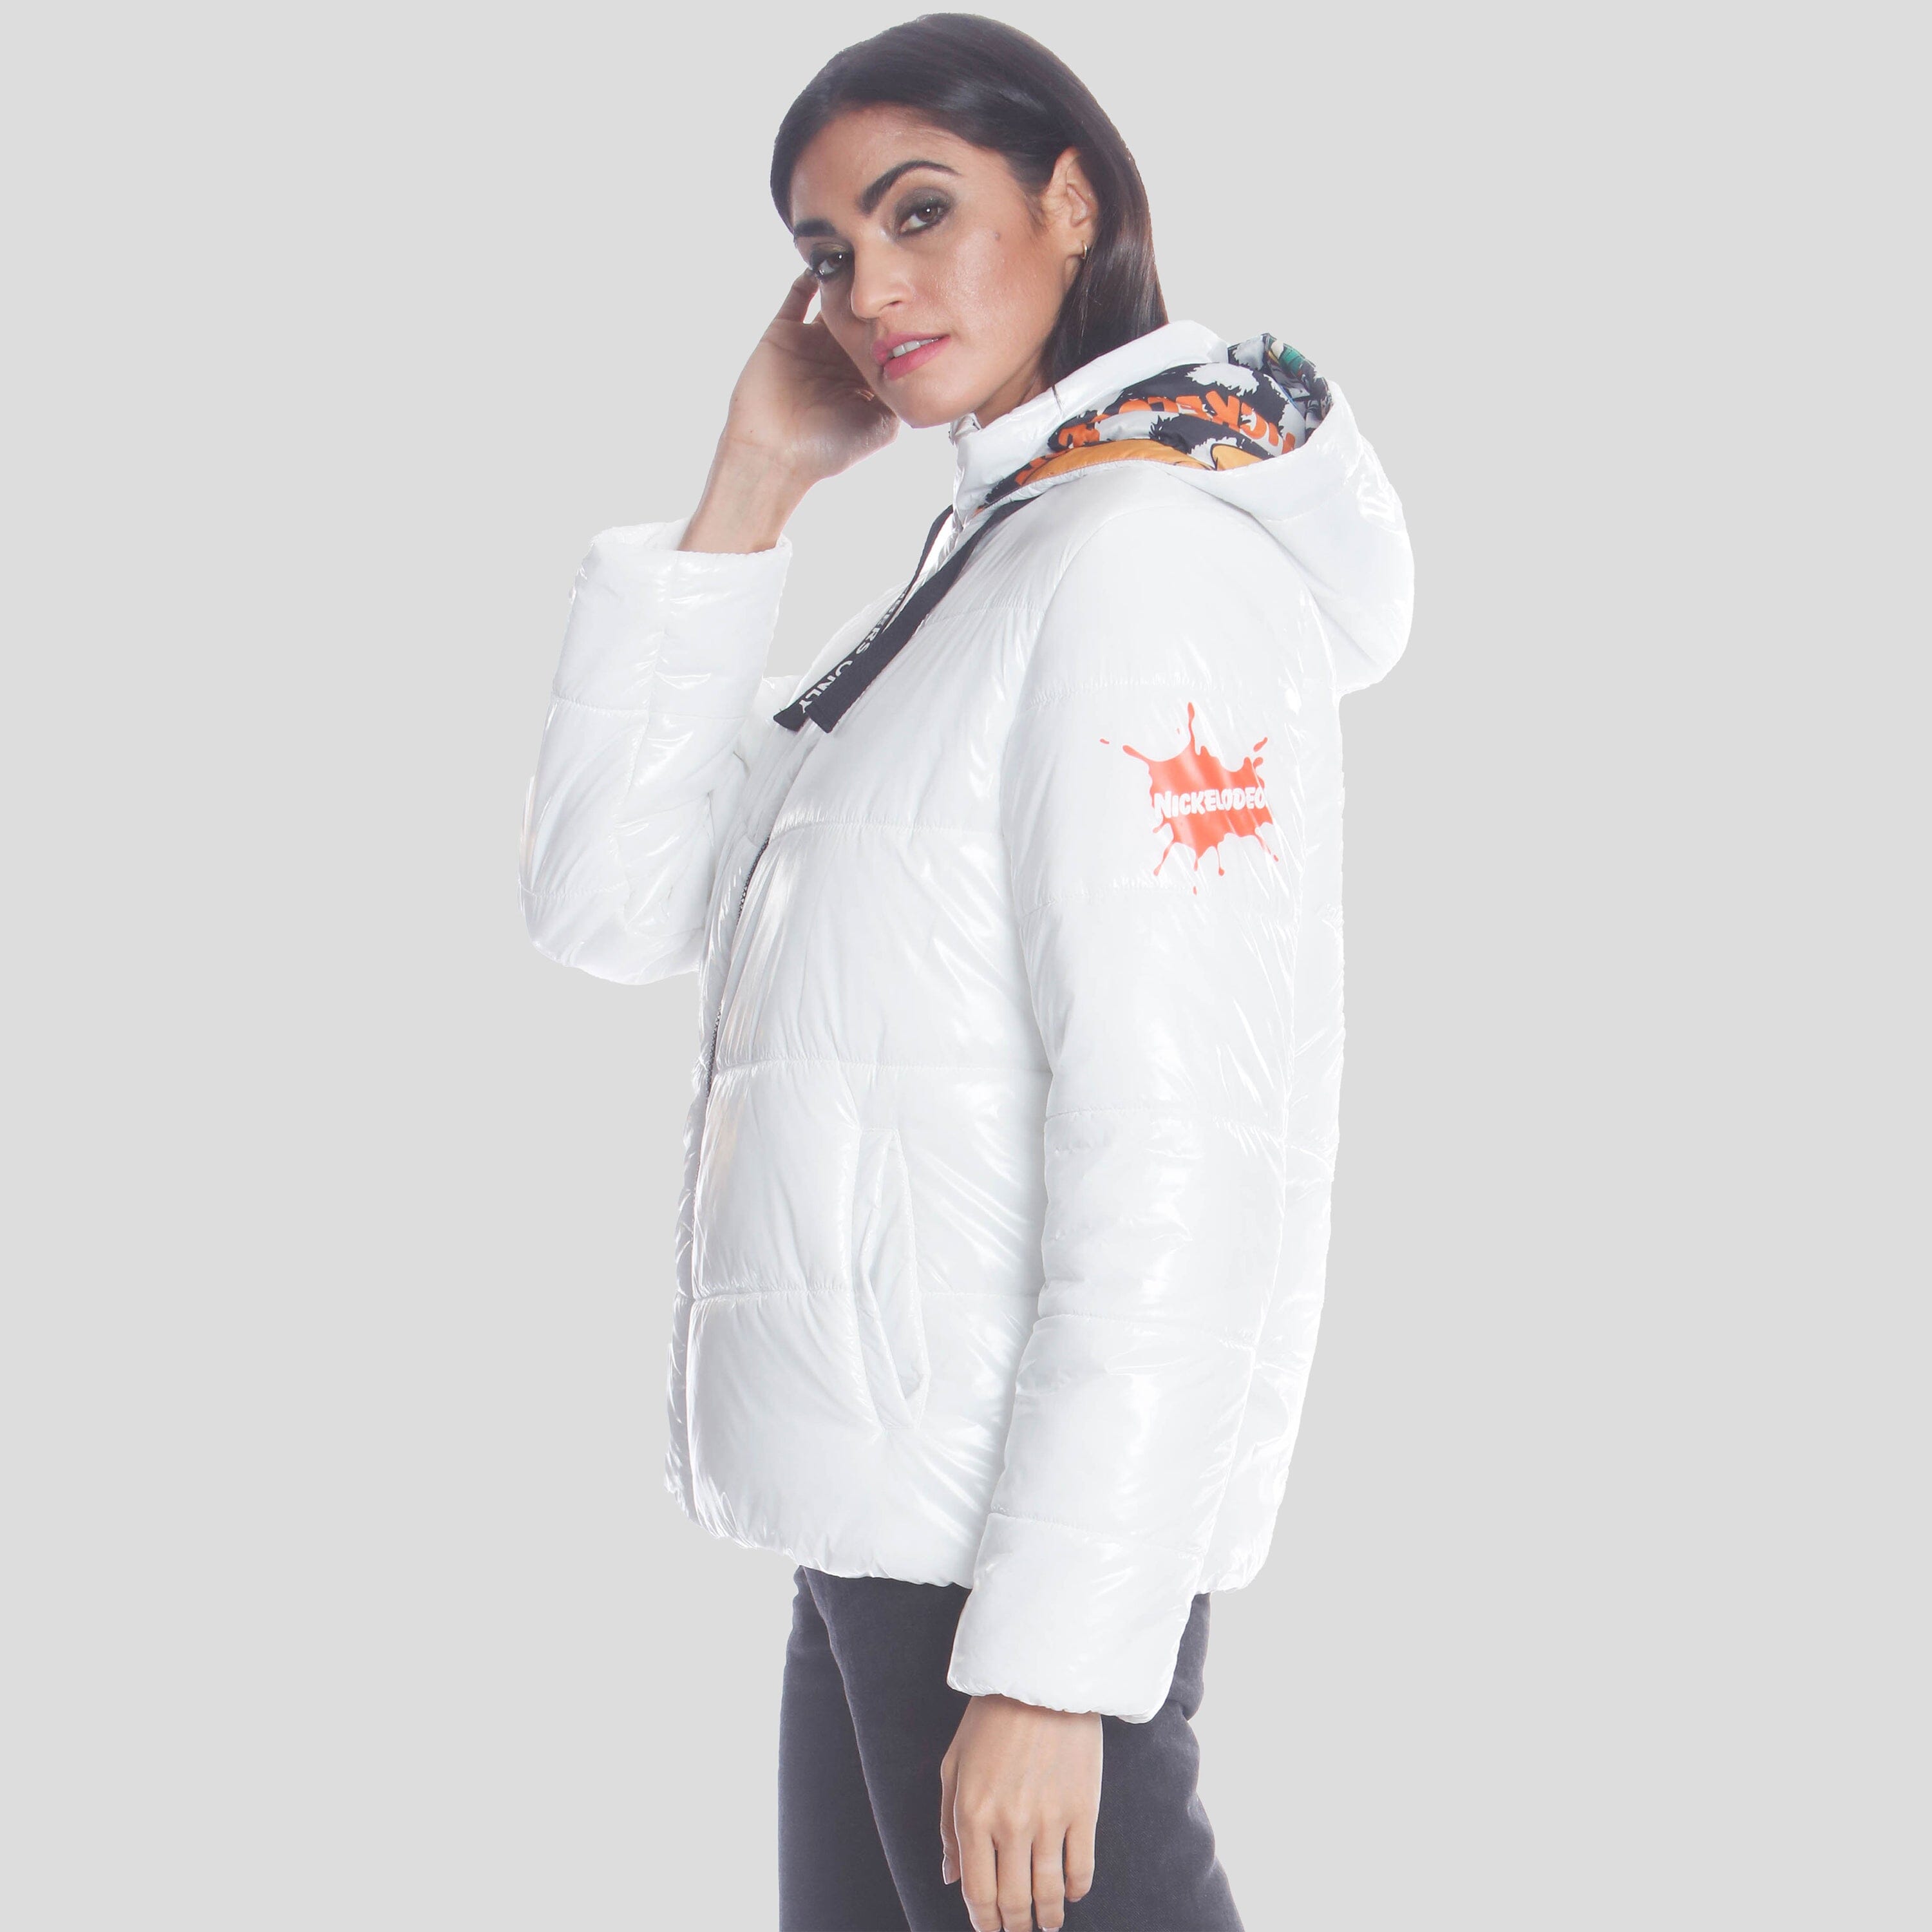 Women's Hi-Shine Chevron Quilt Puffer with Nickelodeon Mashup Print Lining Jacket - FINAL SALE Womens Jacket Members Only 